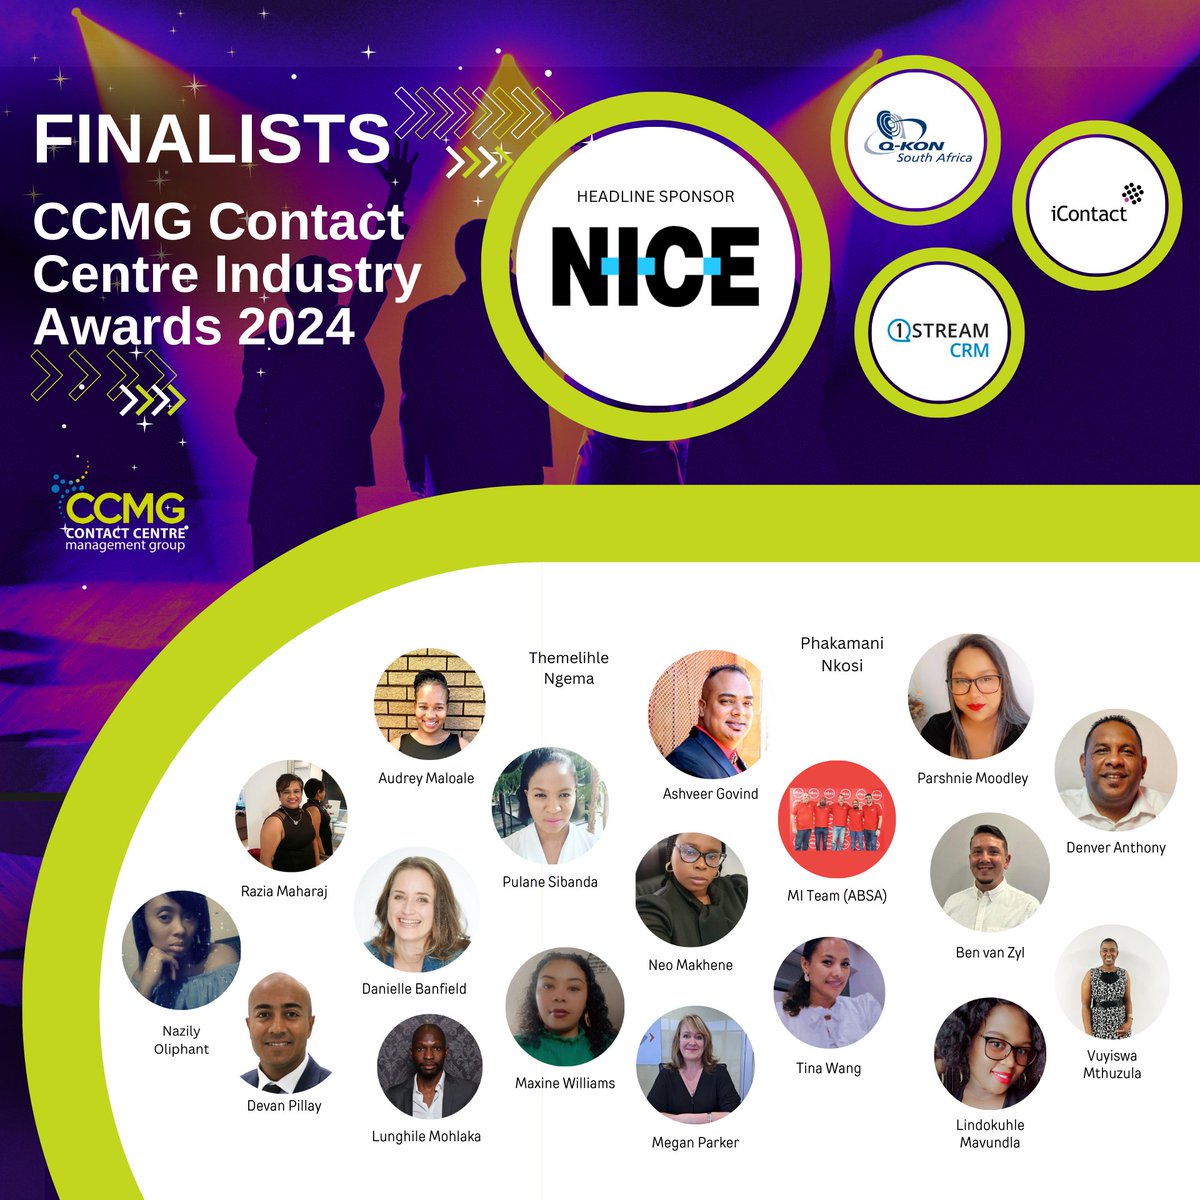 🎉Join us in celebrating our FINALISTS at the CCMG Awards ceremony on Wednesday! Don't miss out on the chance to network with industry leaders and cheer on the finalists! 🌟
To reserve your seats visit events.mm3.co.za/Event/?Id=9957…. Let's make this the best one yet! 🥂 #CCMG2024  #CX